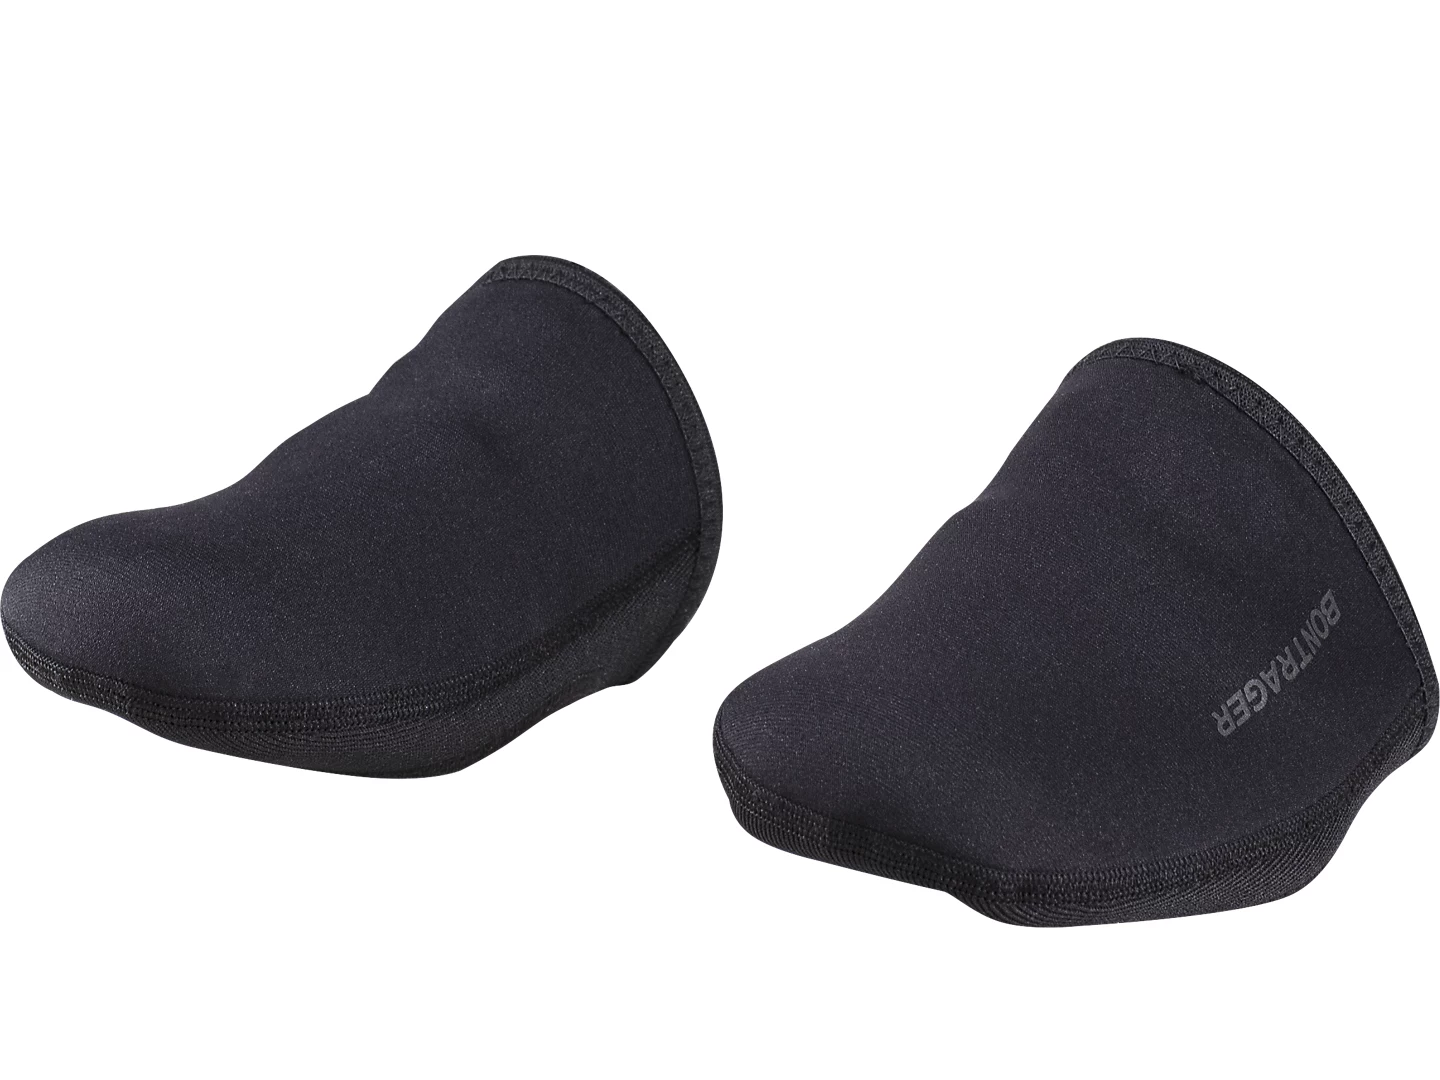 BONTRAGER Windshell Toe Covers click to zoom image